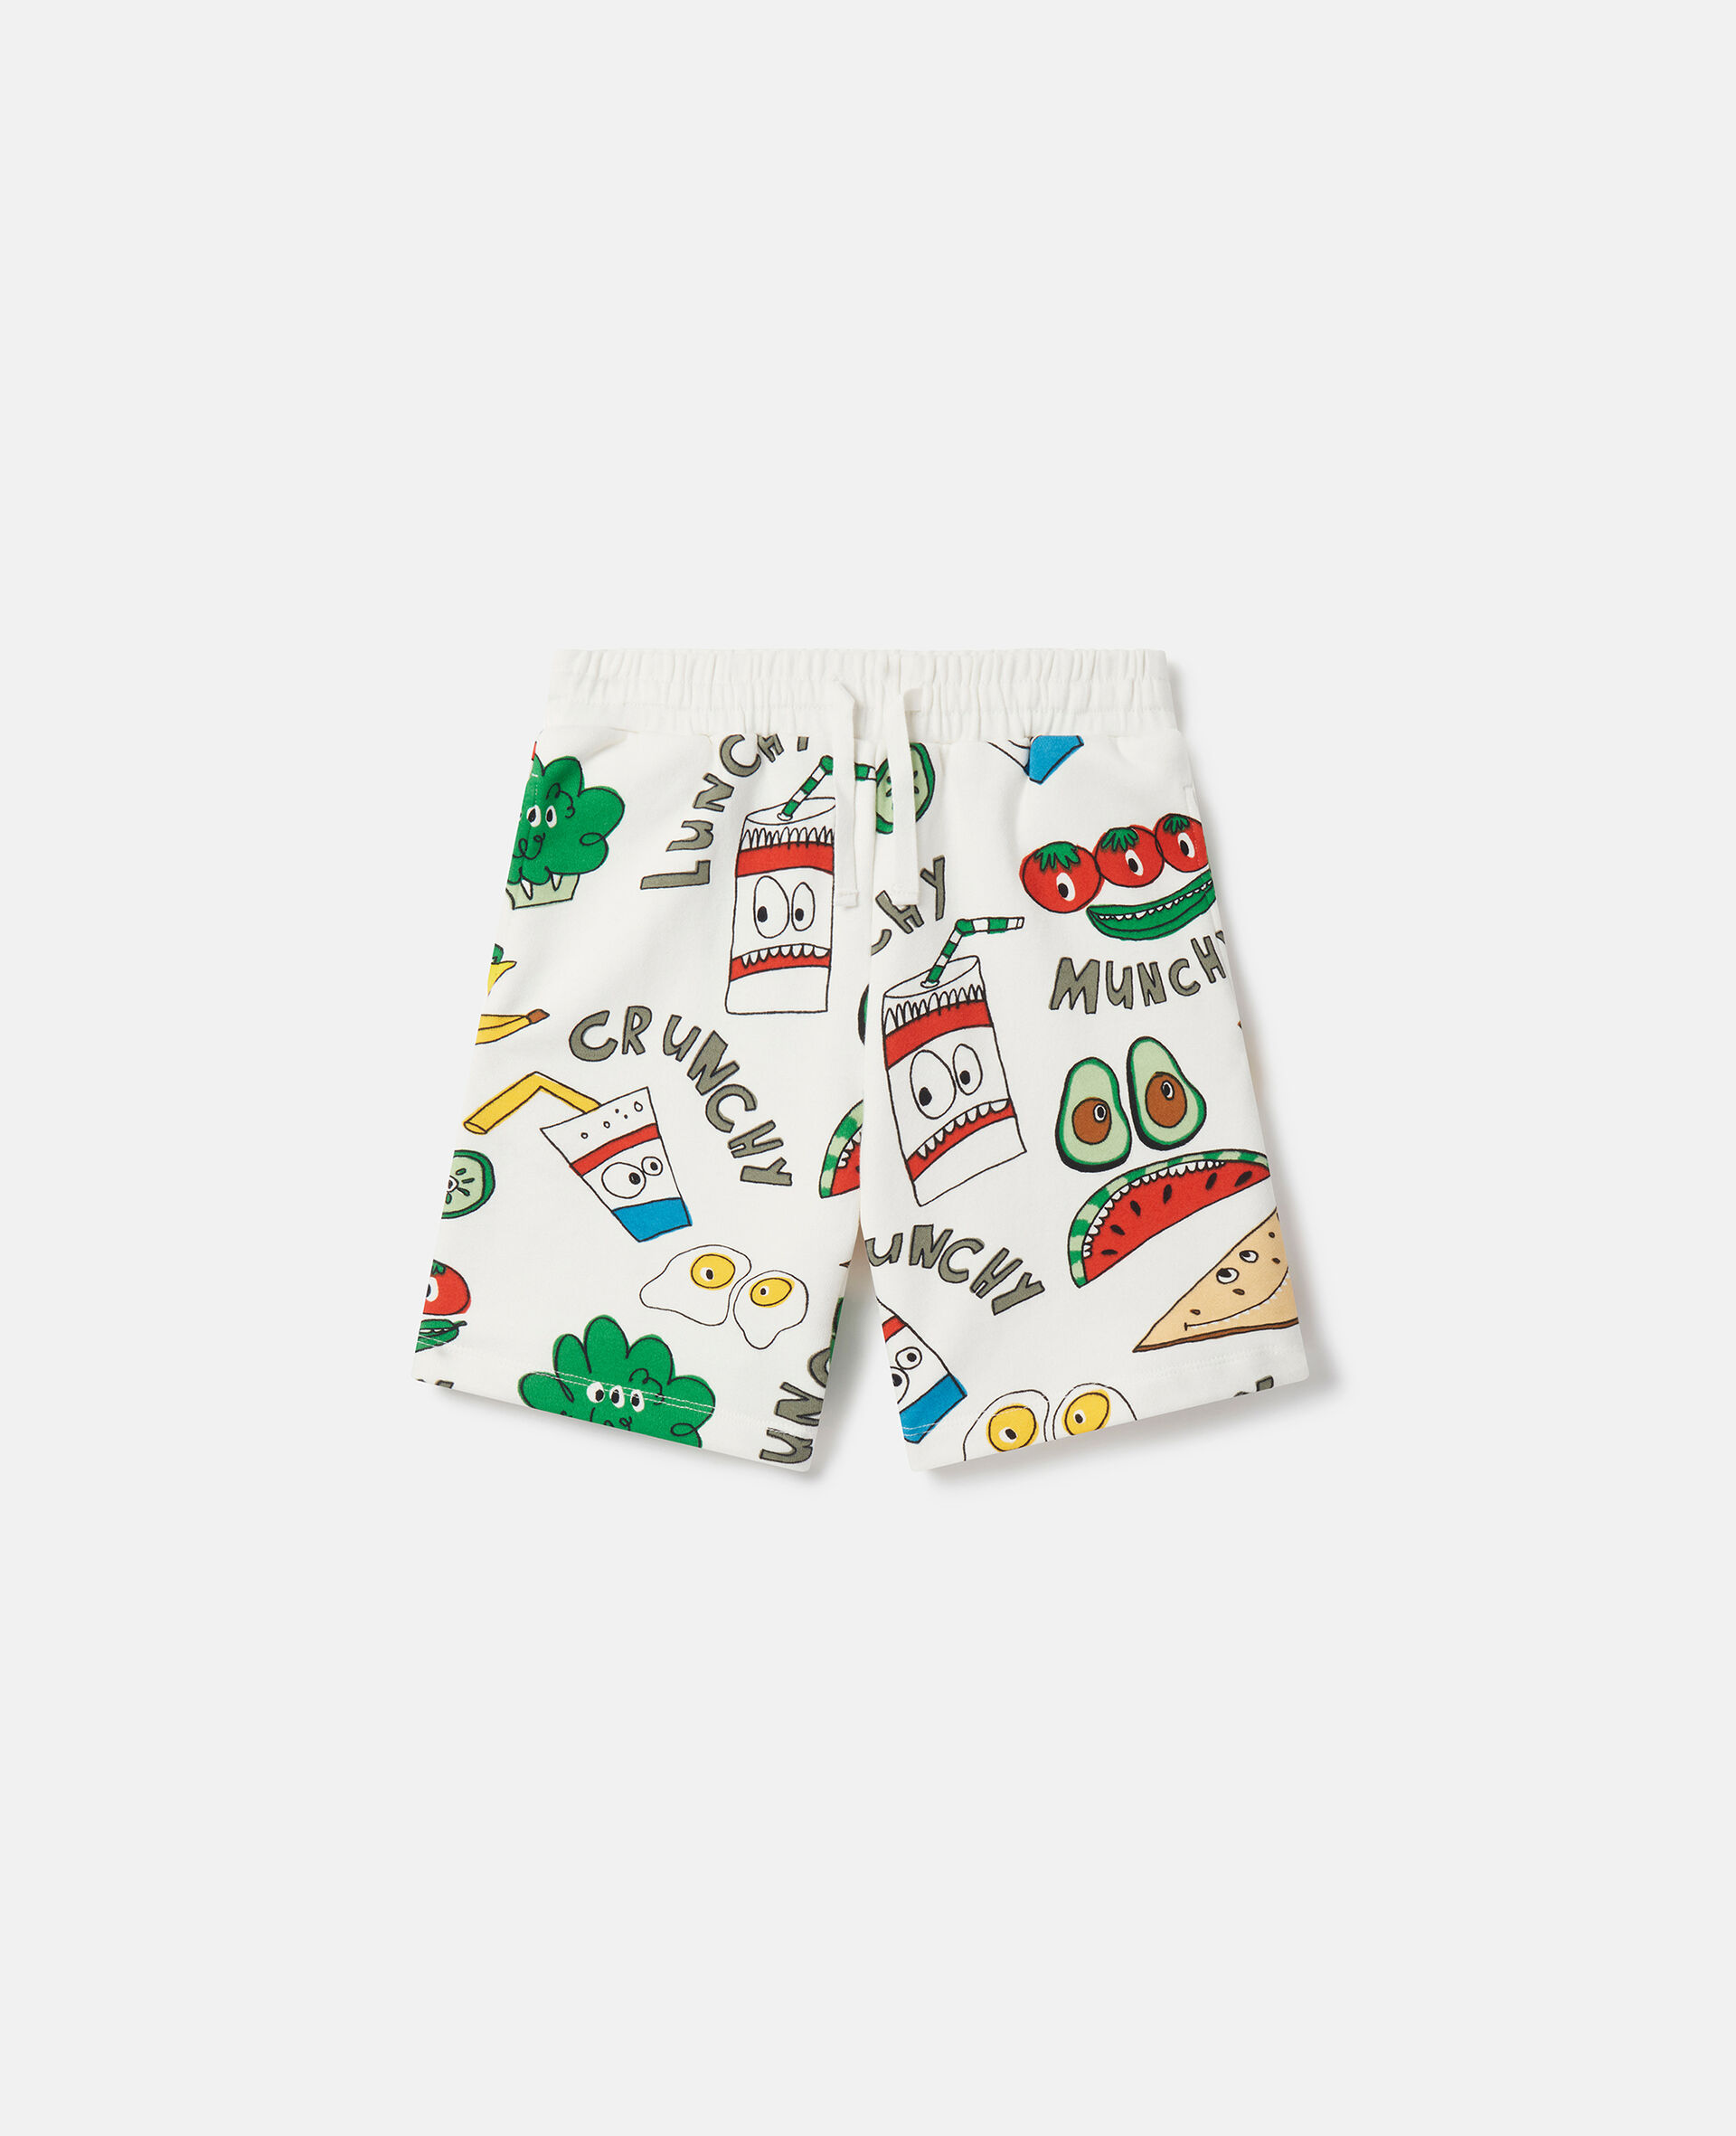 Crunchy Lunchy Print Shorts-Multicoloured-large image number 0